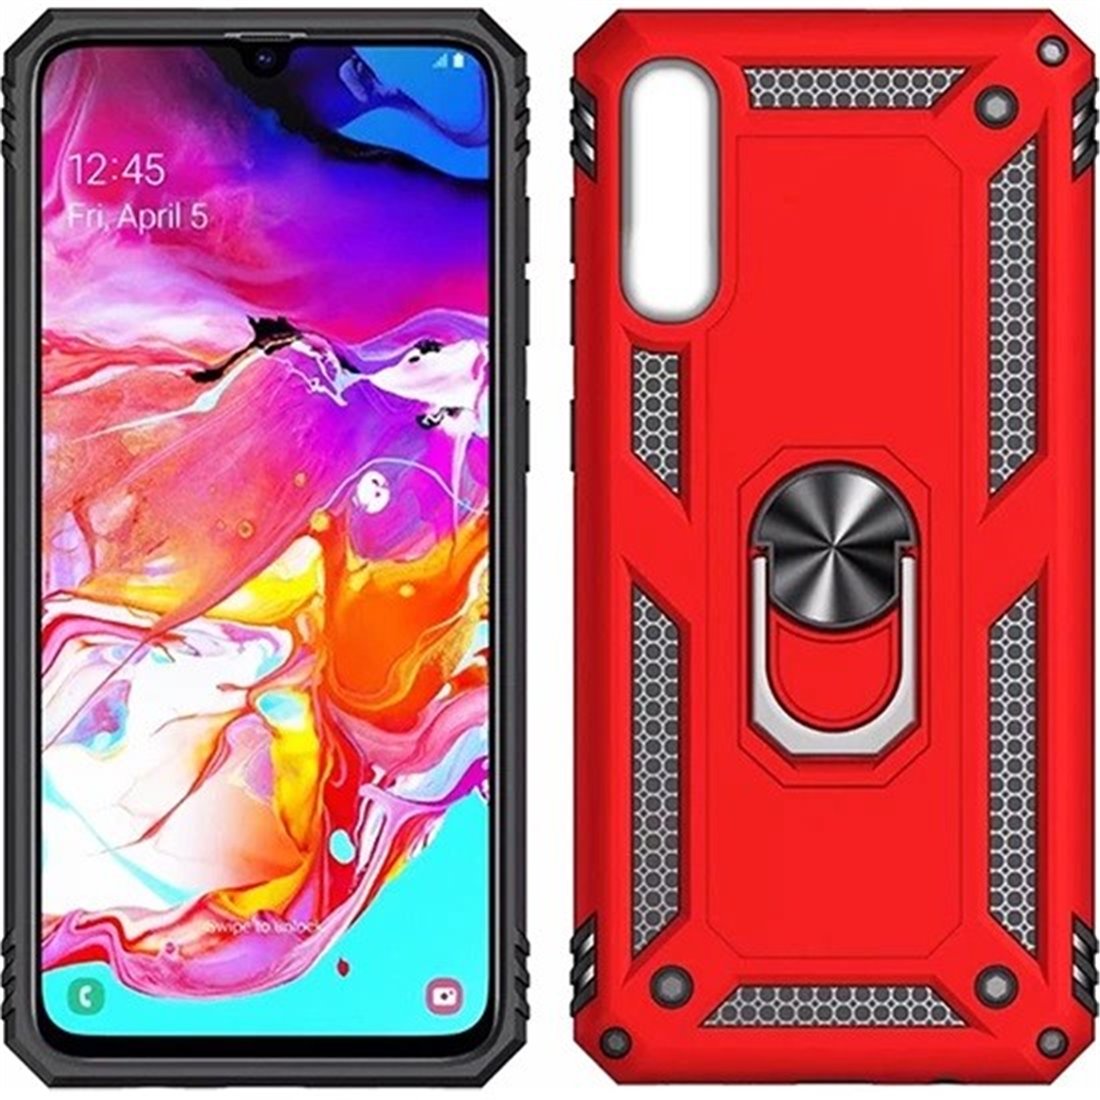 Samsung Galaxy A10 Plastic Red Back Cover - Solid ring